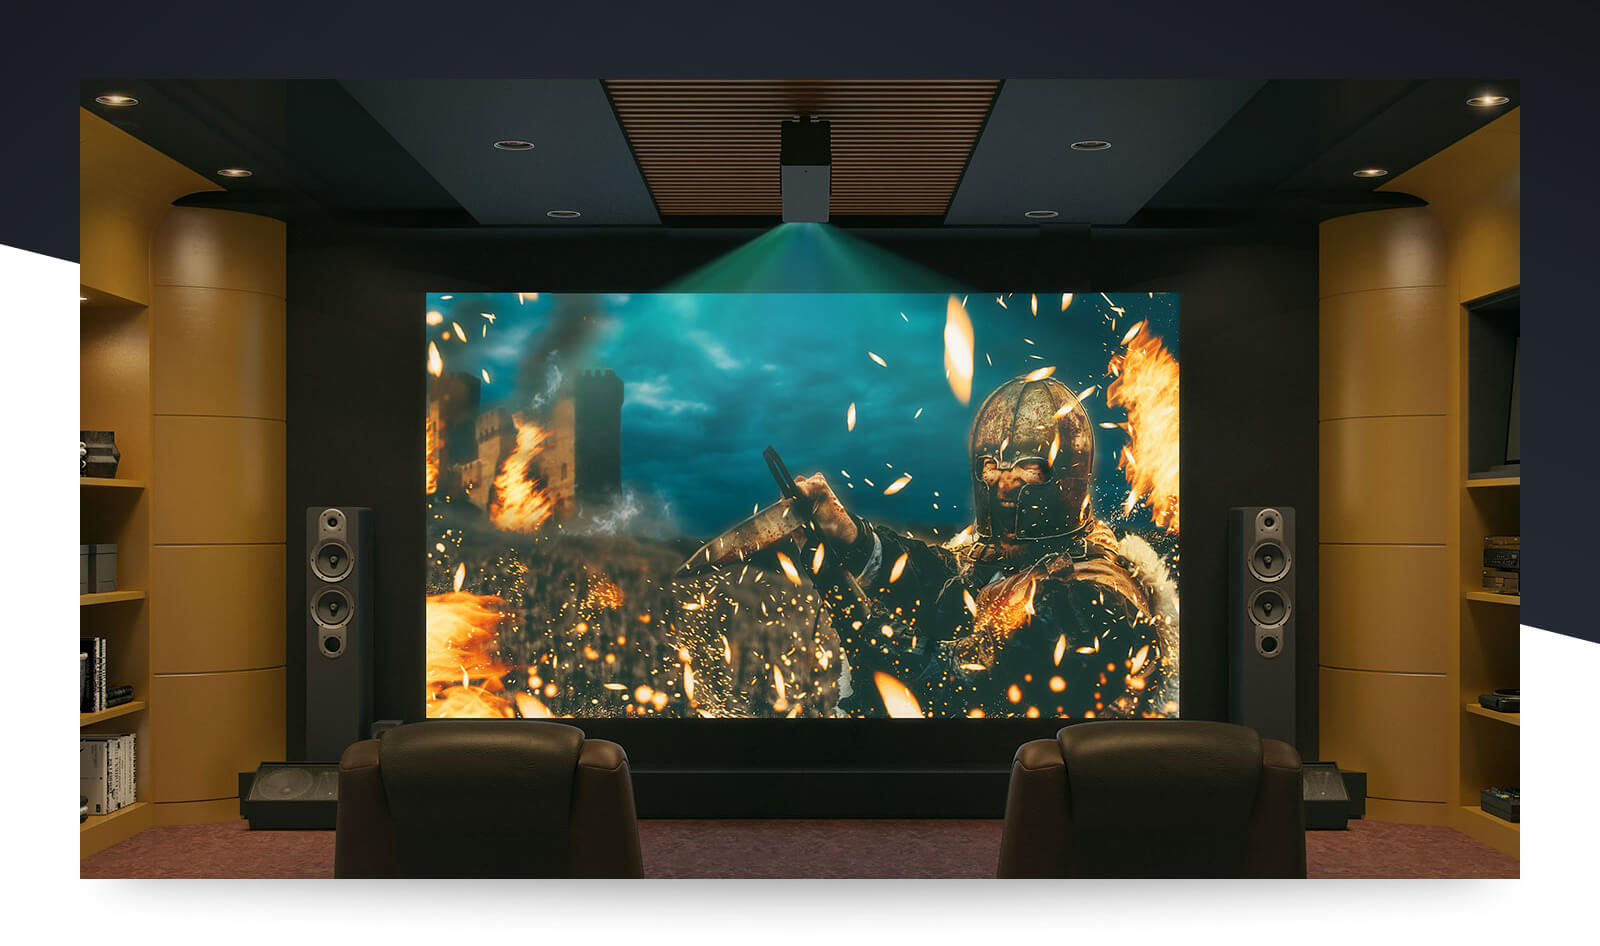 LG Projector Screen Size